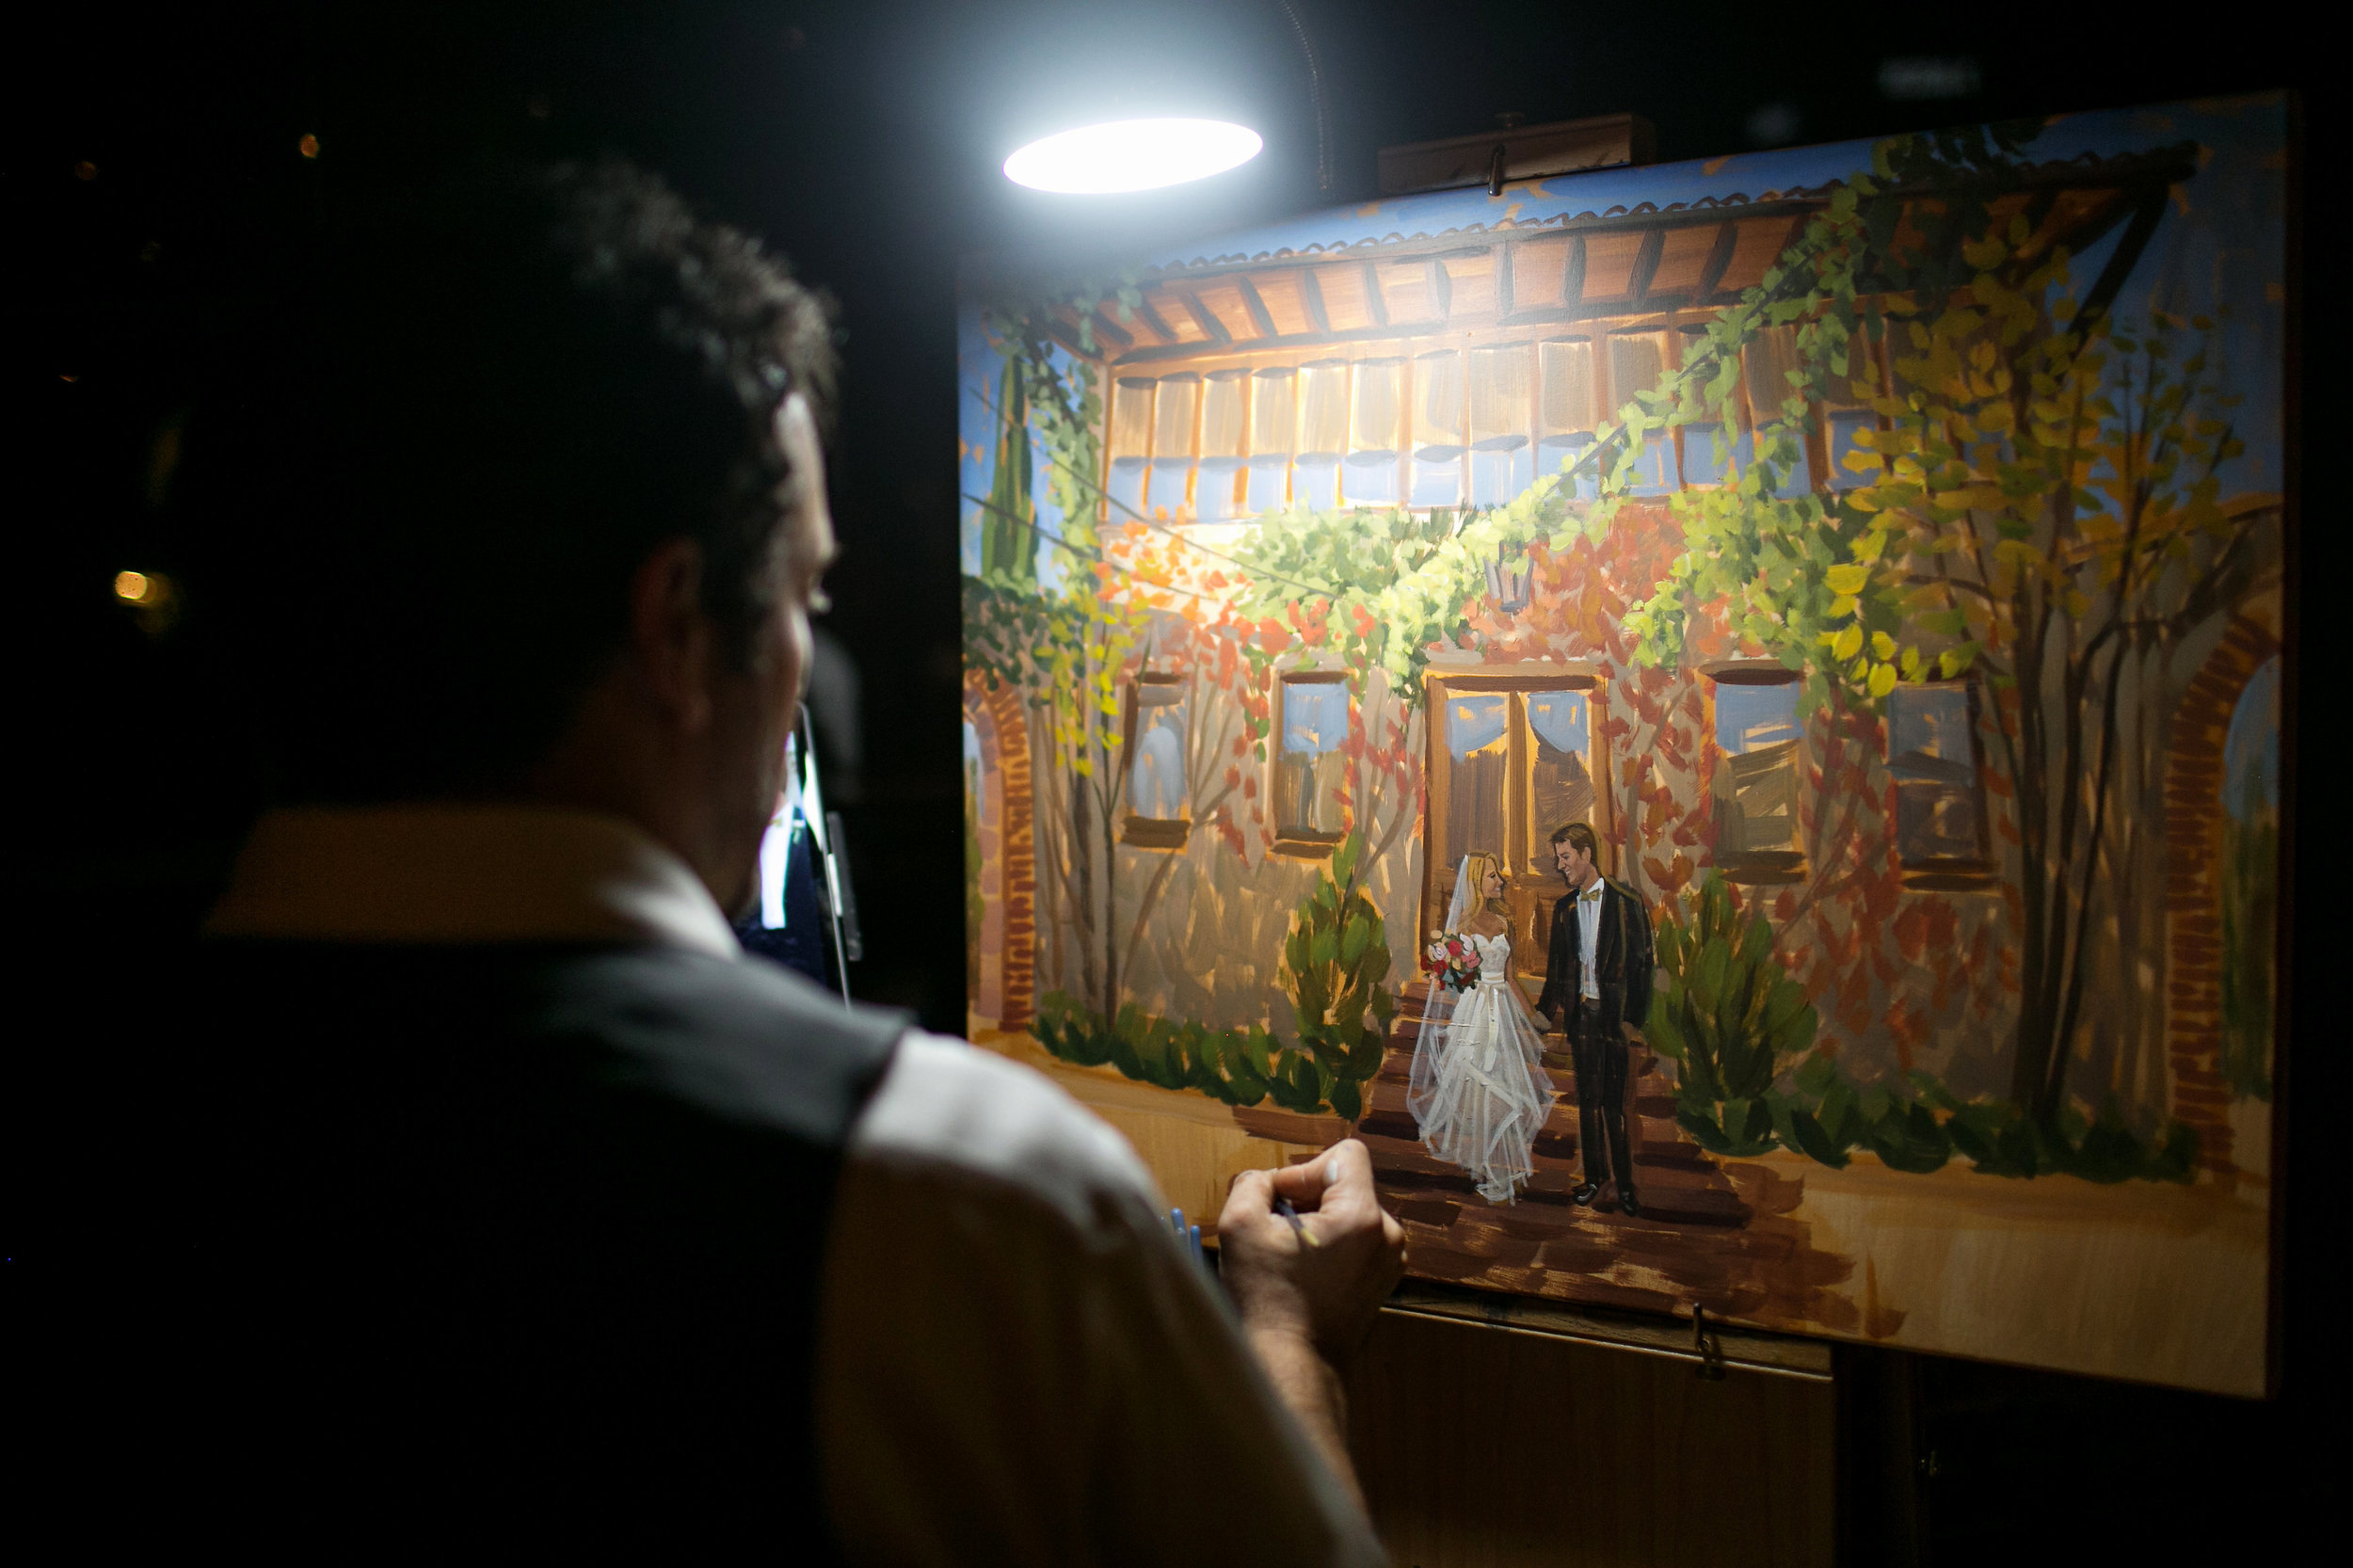 Live wedding painter, Ben Keys, adding the details to Kelsey + Eric's ceremony painting at Summerour Studio in Atlanta.